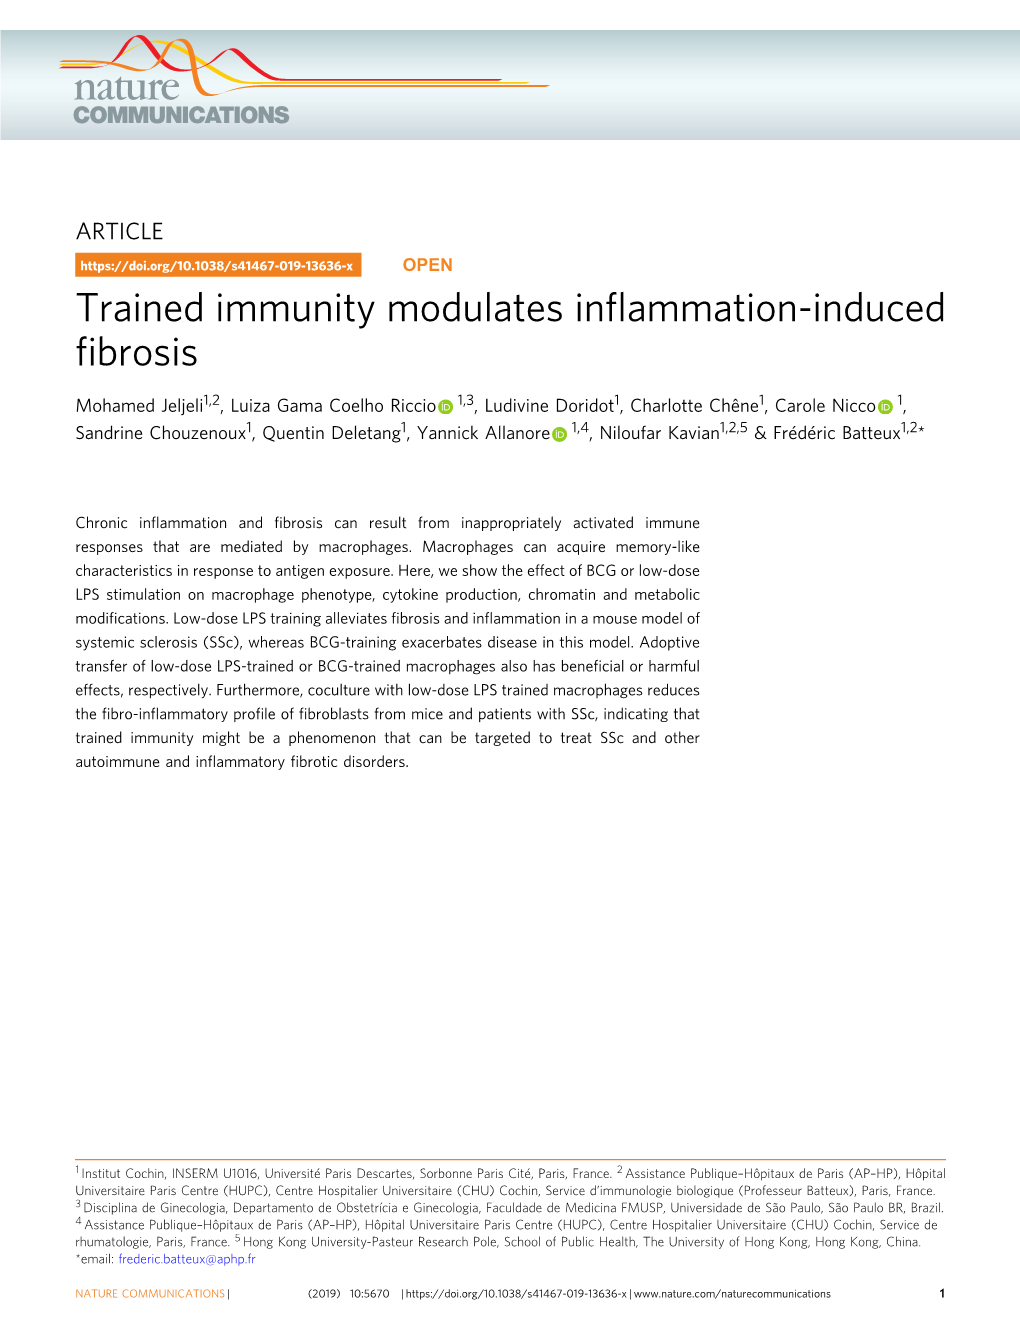 Trained Immunity Modulates Inflammation-Induced Fibrosis